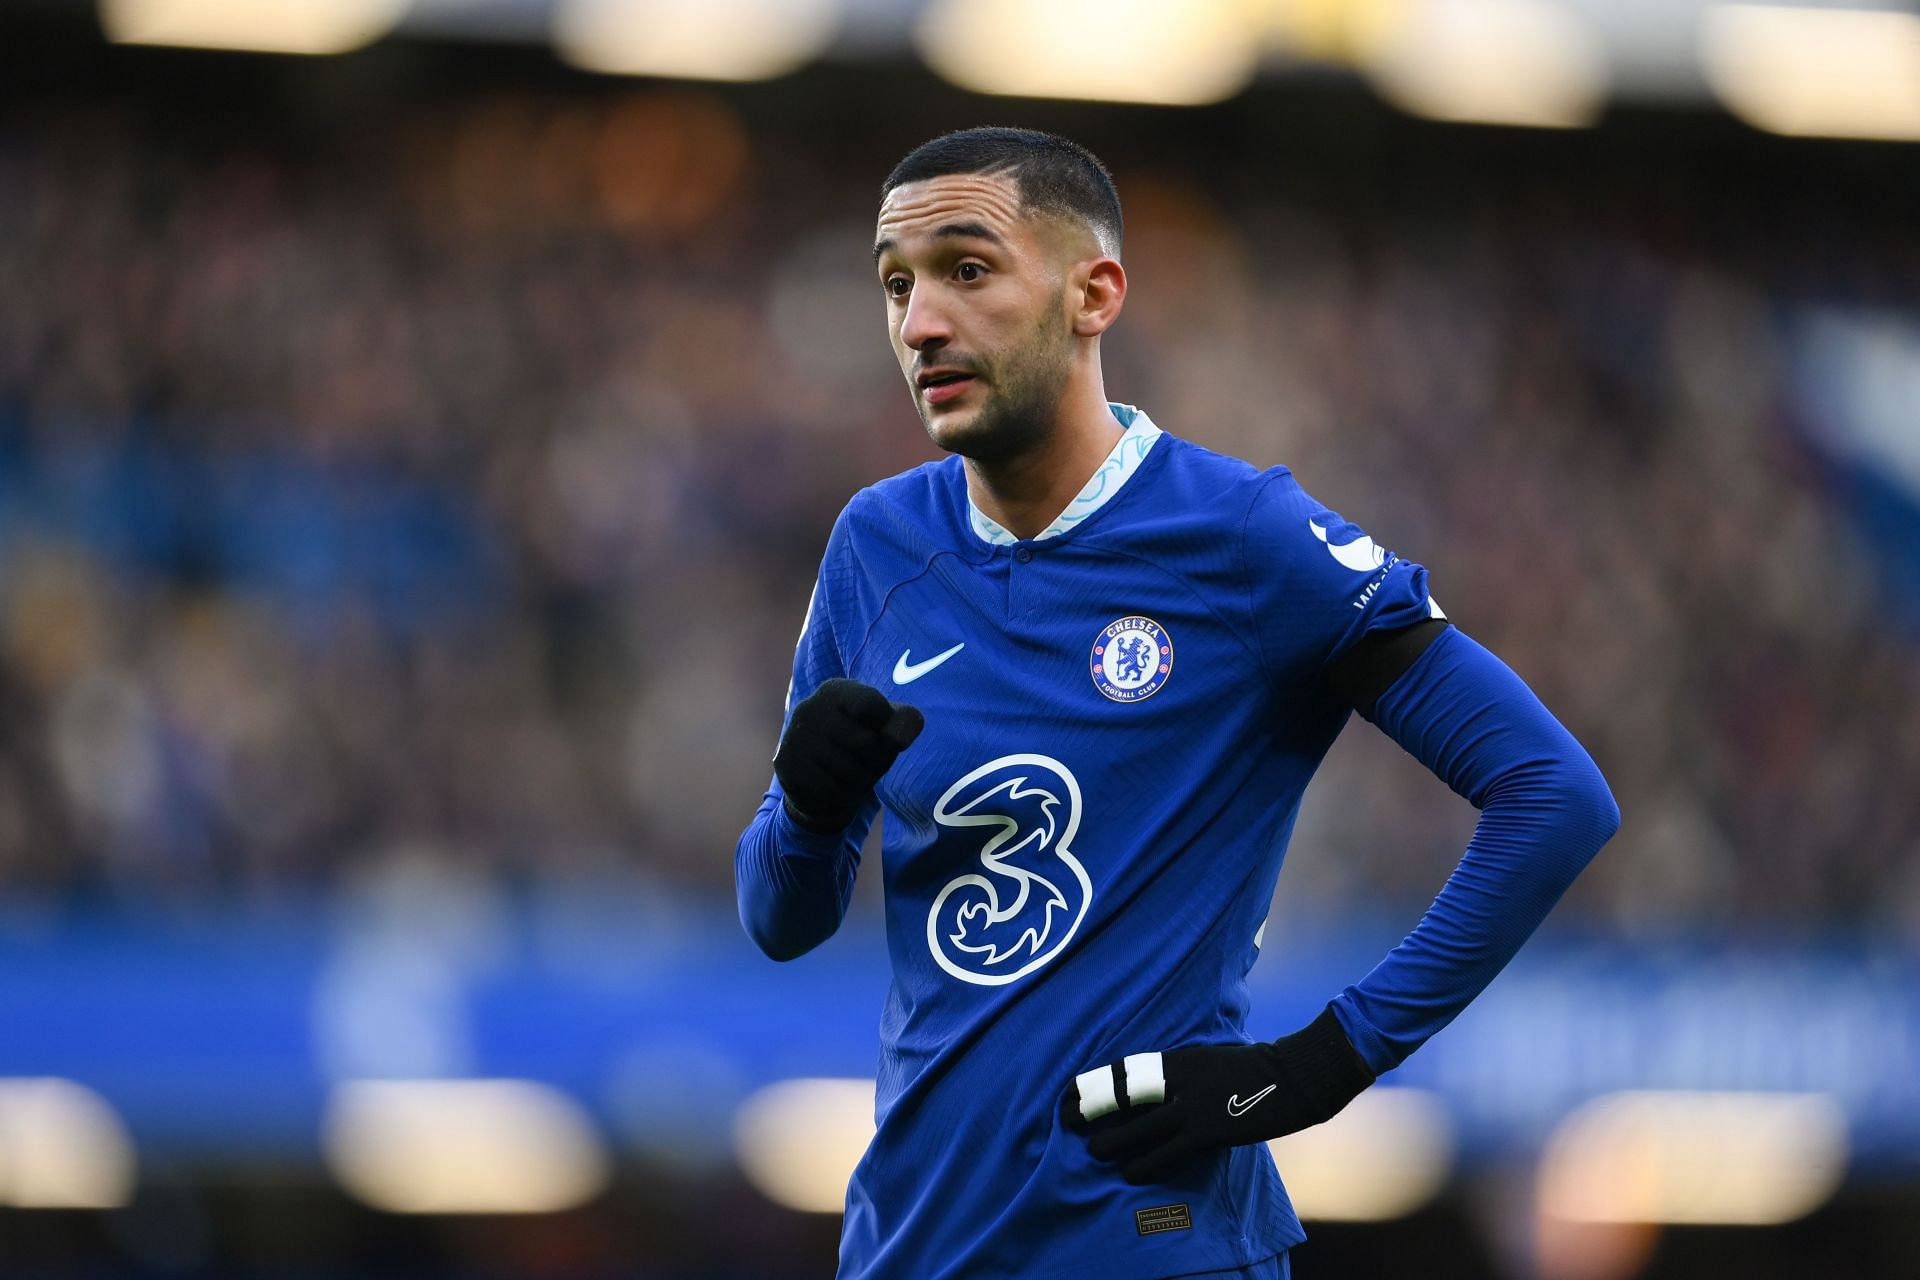 Ziyech is attracting interest from PSG